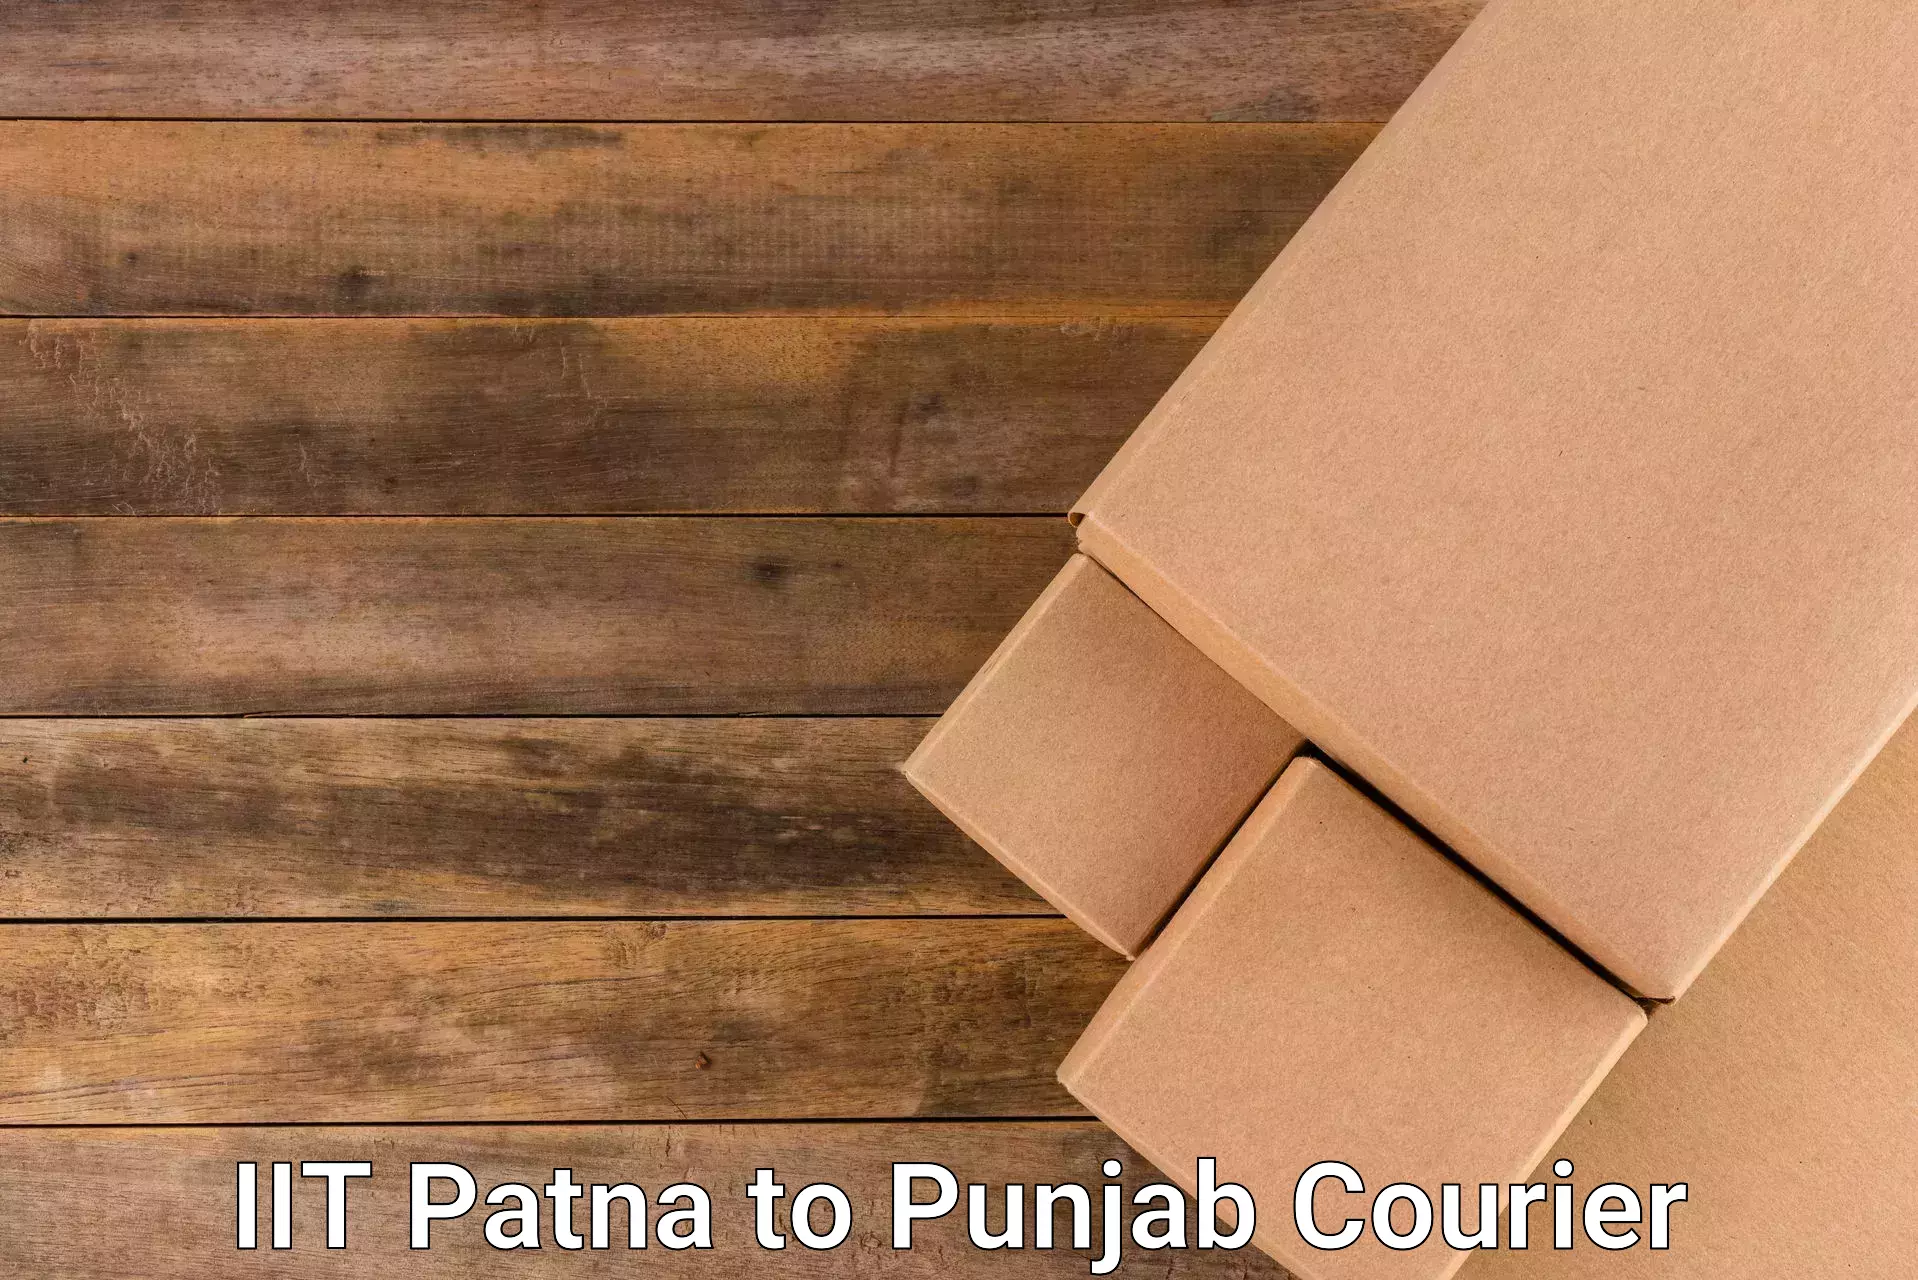 24-hour courier services IIT Patna to Muktsar